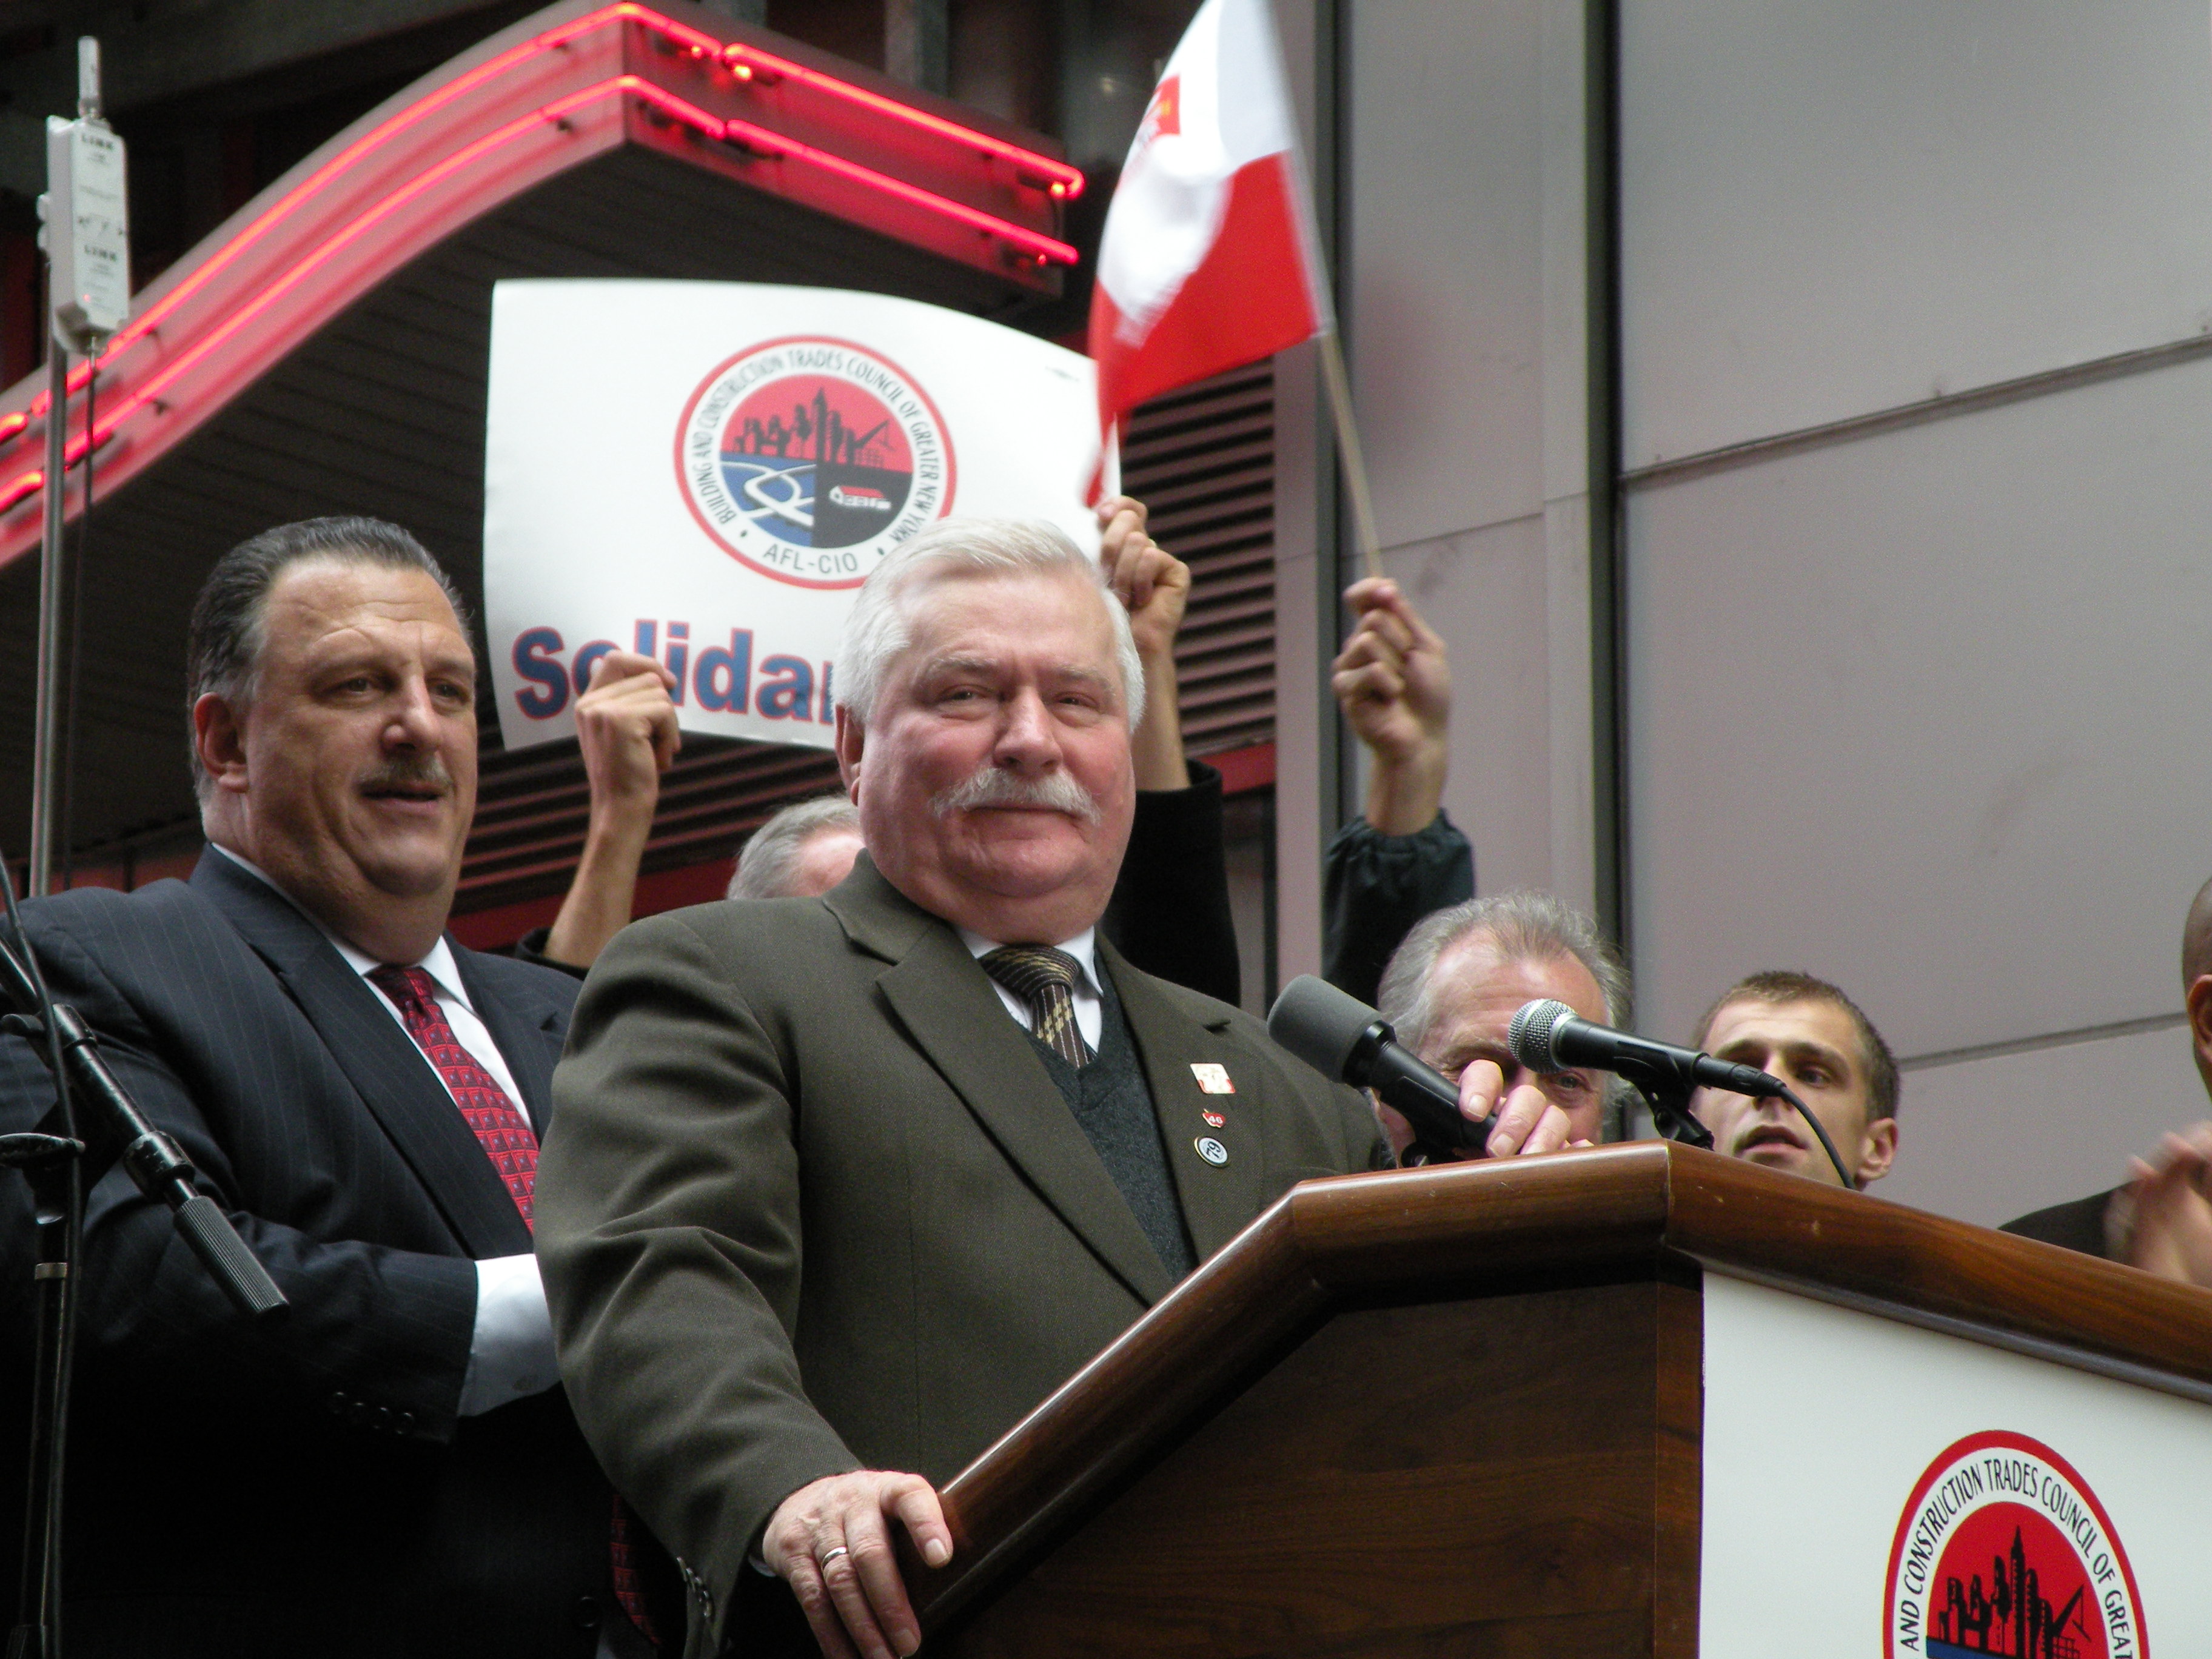 President Lech Walesa Expresses Solidarity with New York Building Trades